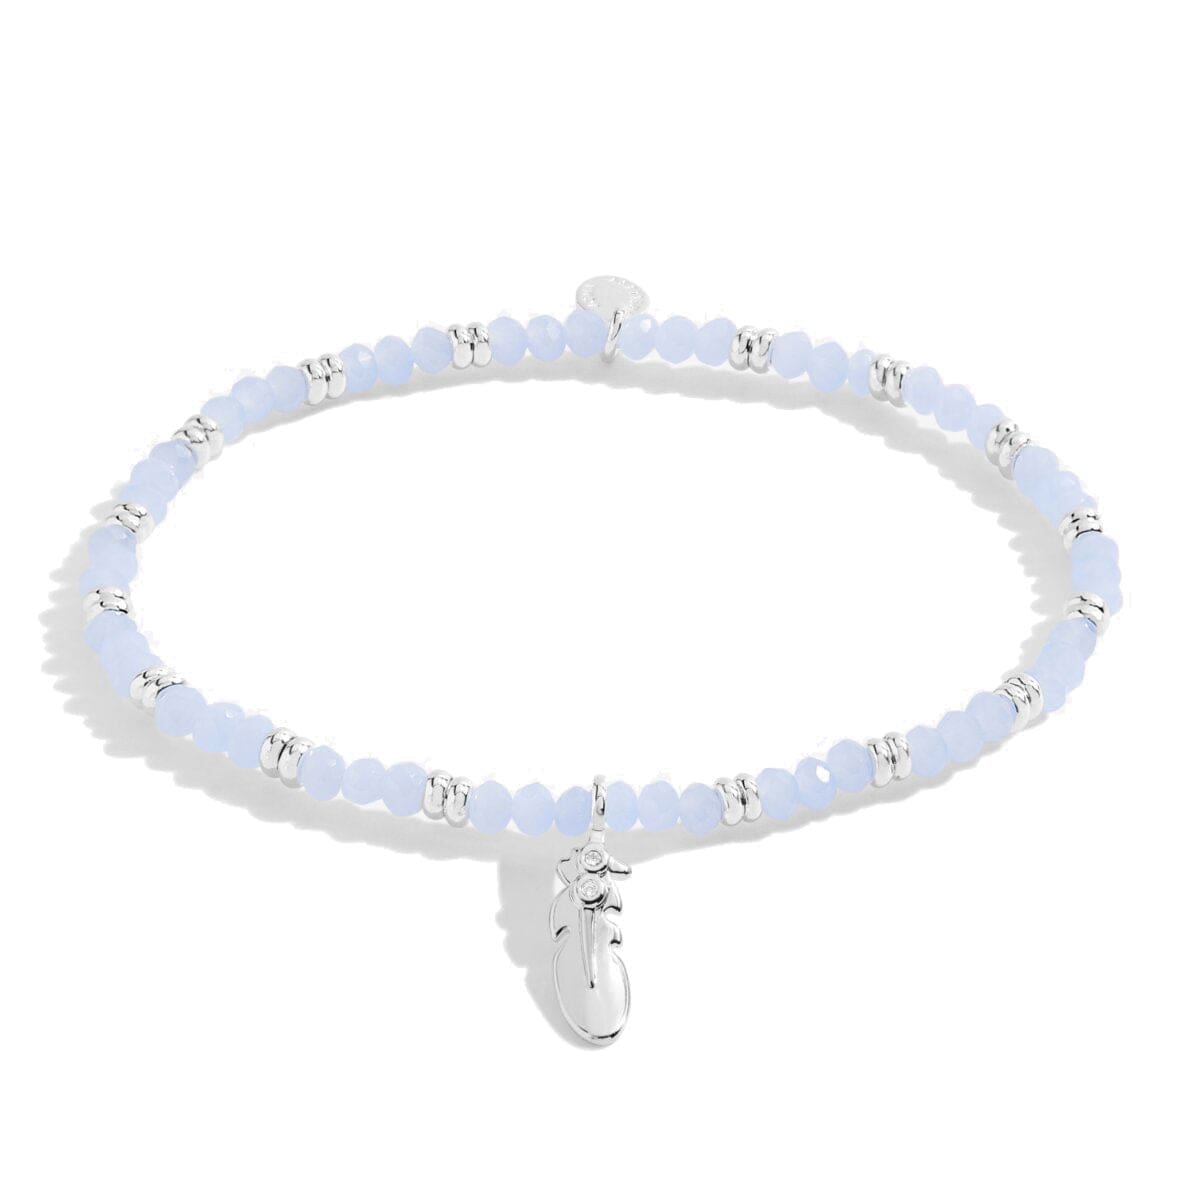 Joma Jewellery Bracelet Joma Jewellery Live Life In Colour Bracelet - A Little Feathers Appear When Loved Ones Are Near